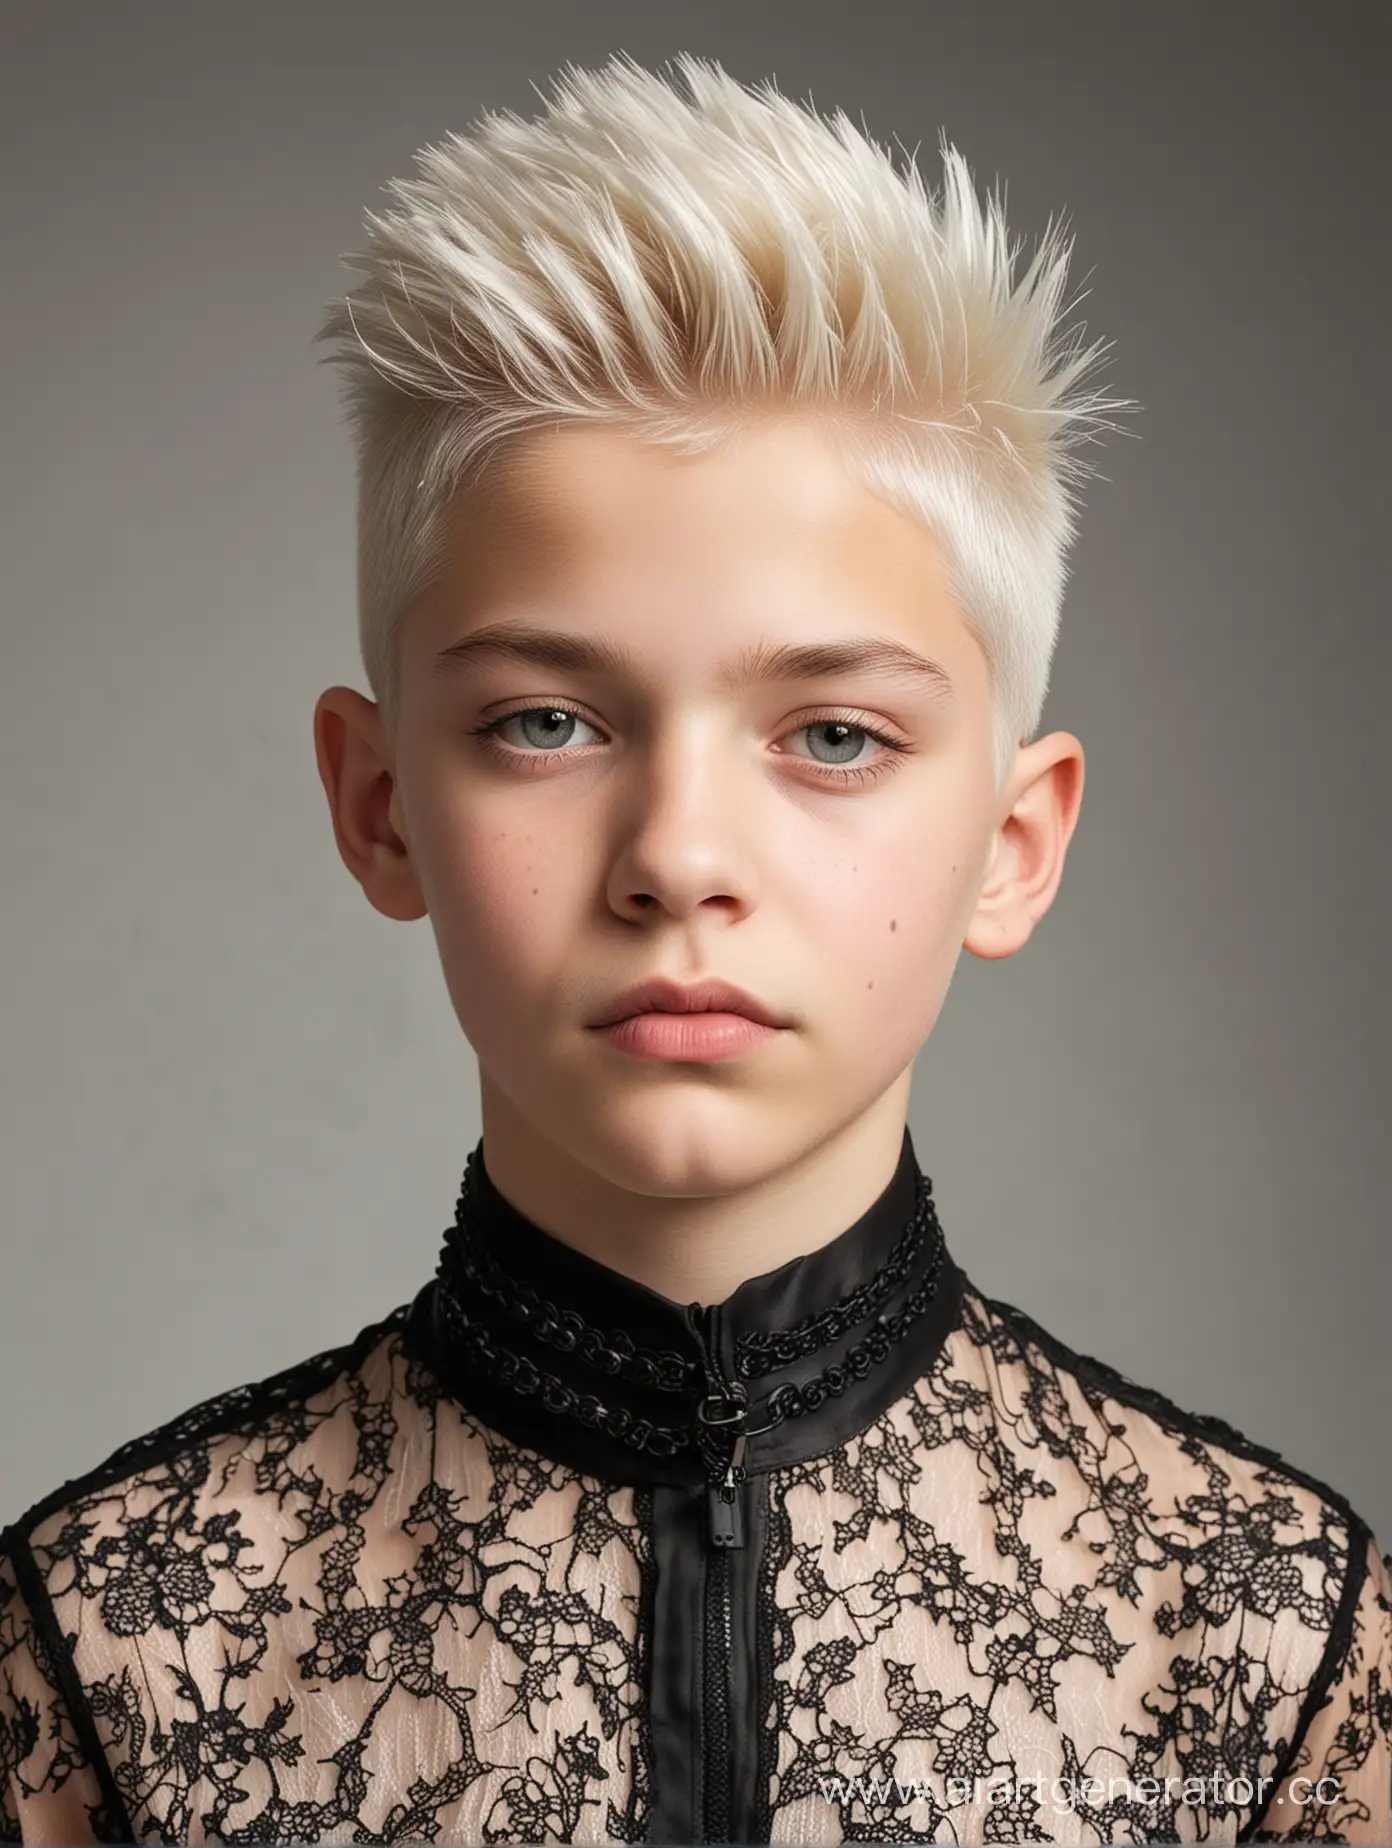 Stylish-12YearOld-Boy-in-Modern-Lace-Jumpsuit-with-Spiked-Collar